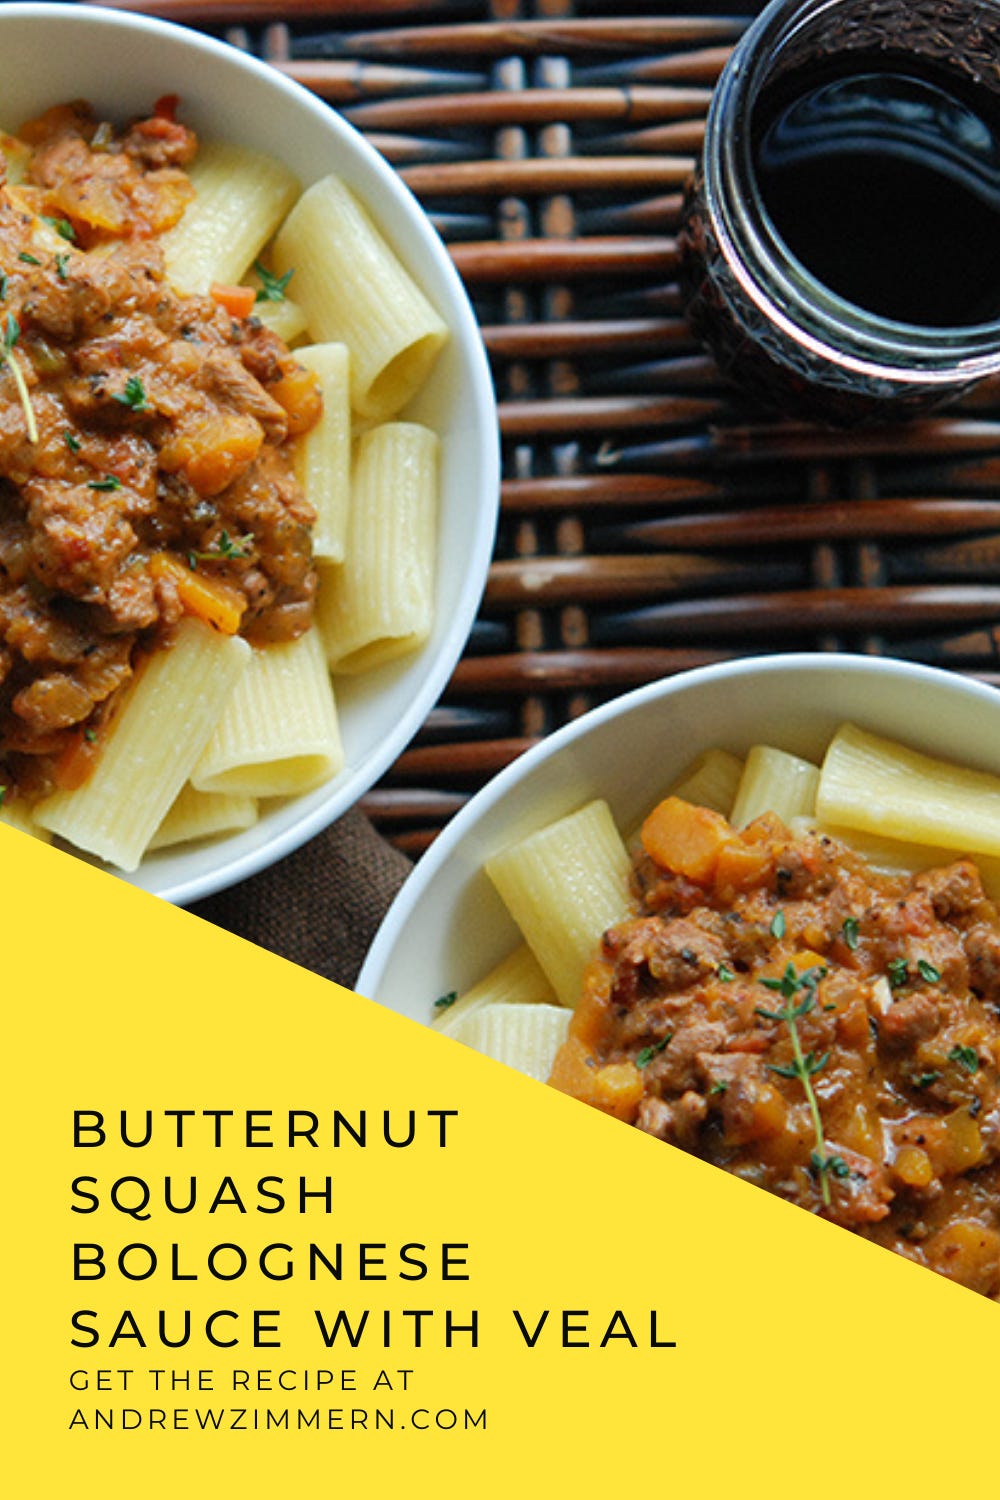 Andrew Zimmern's Butternut Squash Bolognese Sauce with Veal recipe.